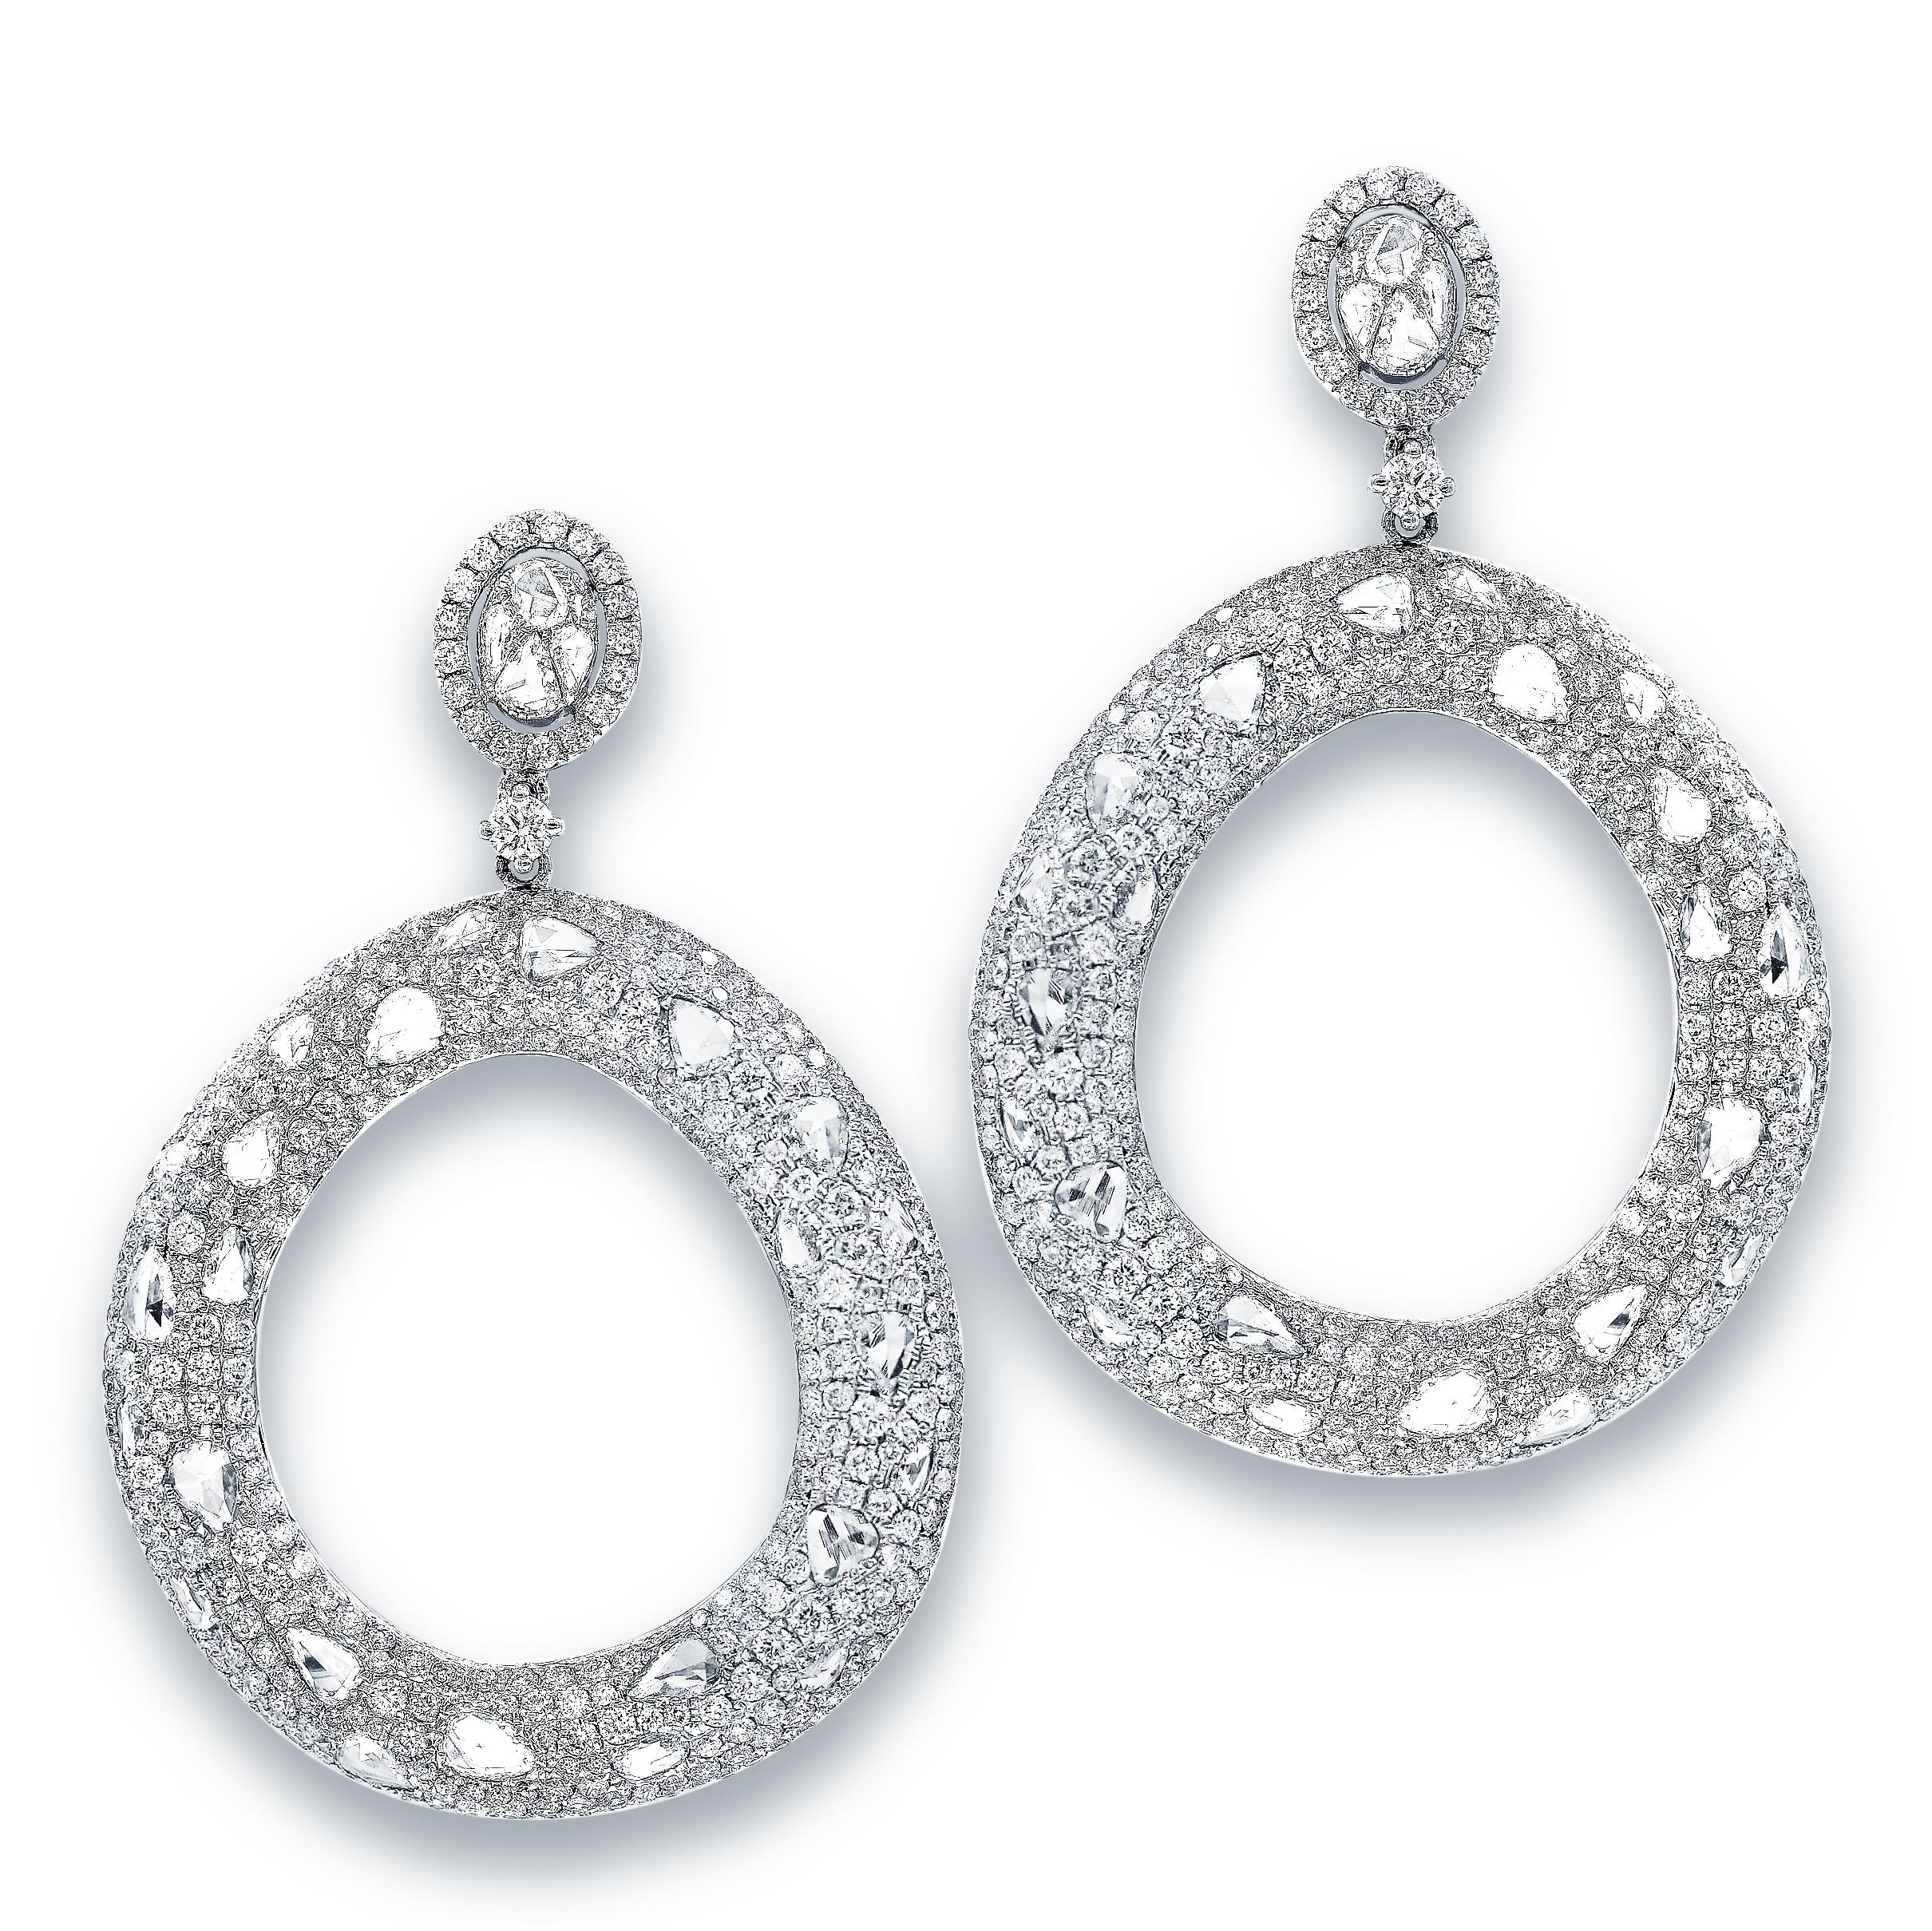 18 kt white gold circle diamond earrings containing 9.61 cts tw of rose cut and round diamonds.
Diana M. has been a leading supplier of top-quality fine jewelry for over 35 years.
Diana M is a one-stop shop for all your jewelry shopping, carrying a